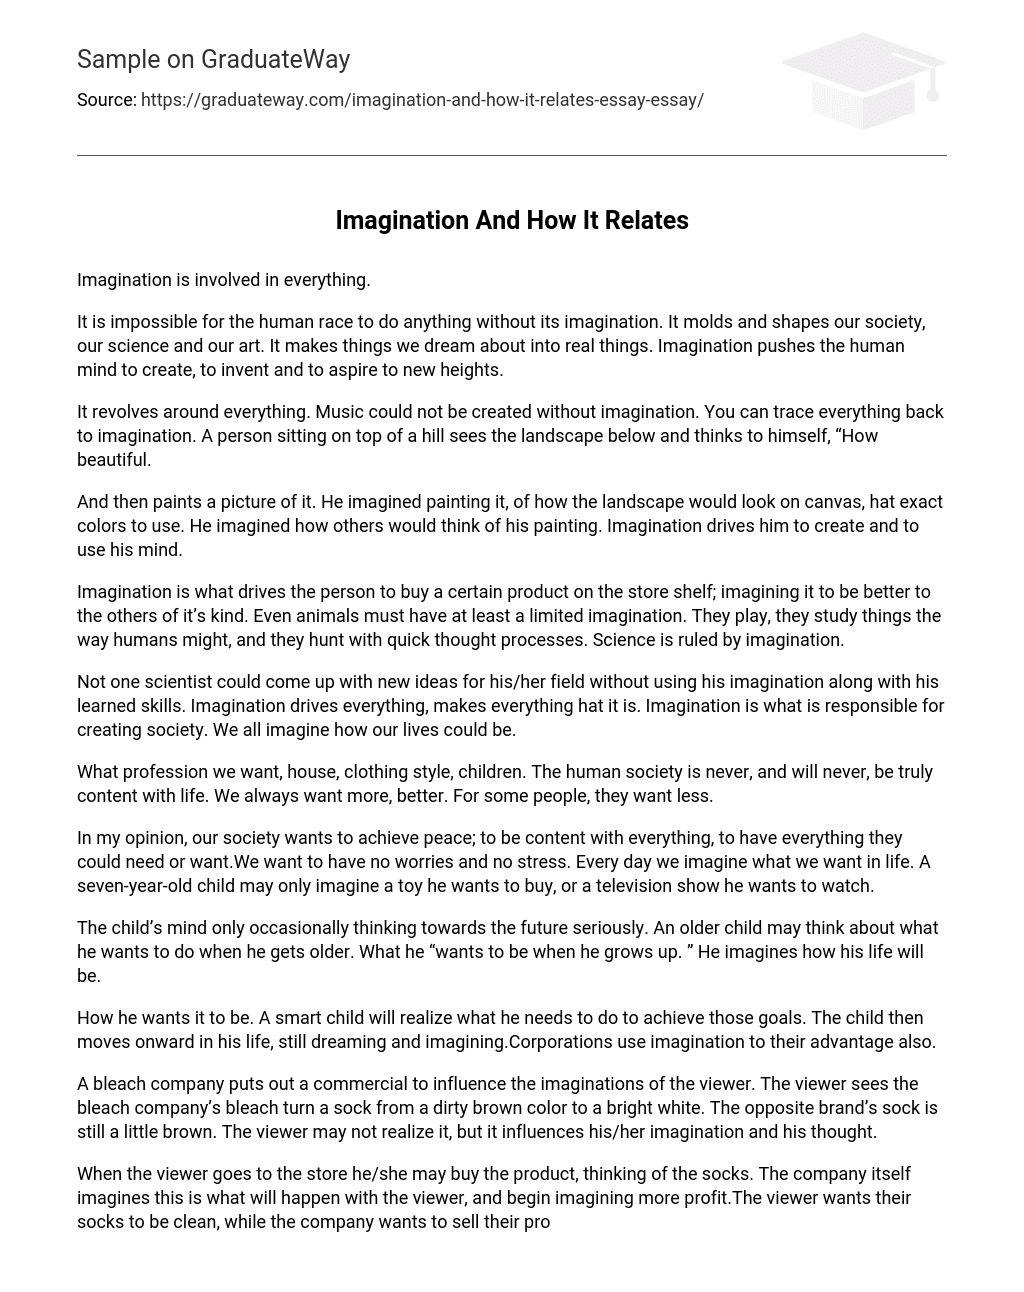 Imagination And How It Relates